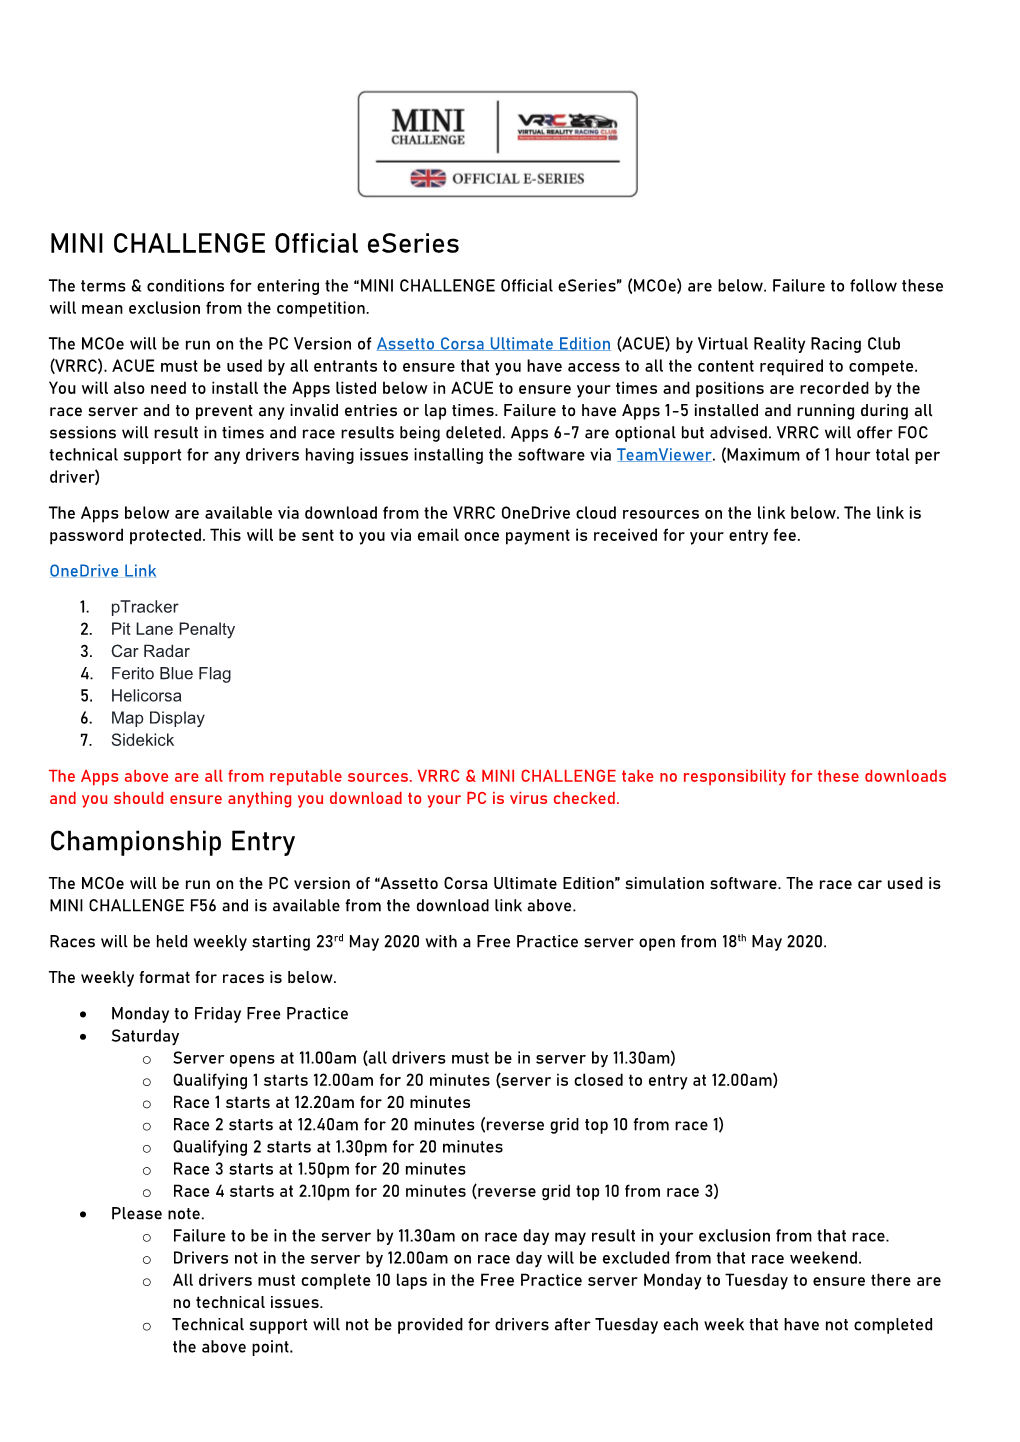 MINI CHALLENGE Official Eseries Championship Entry